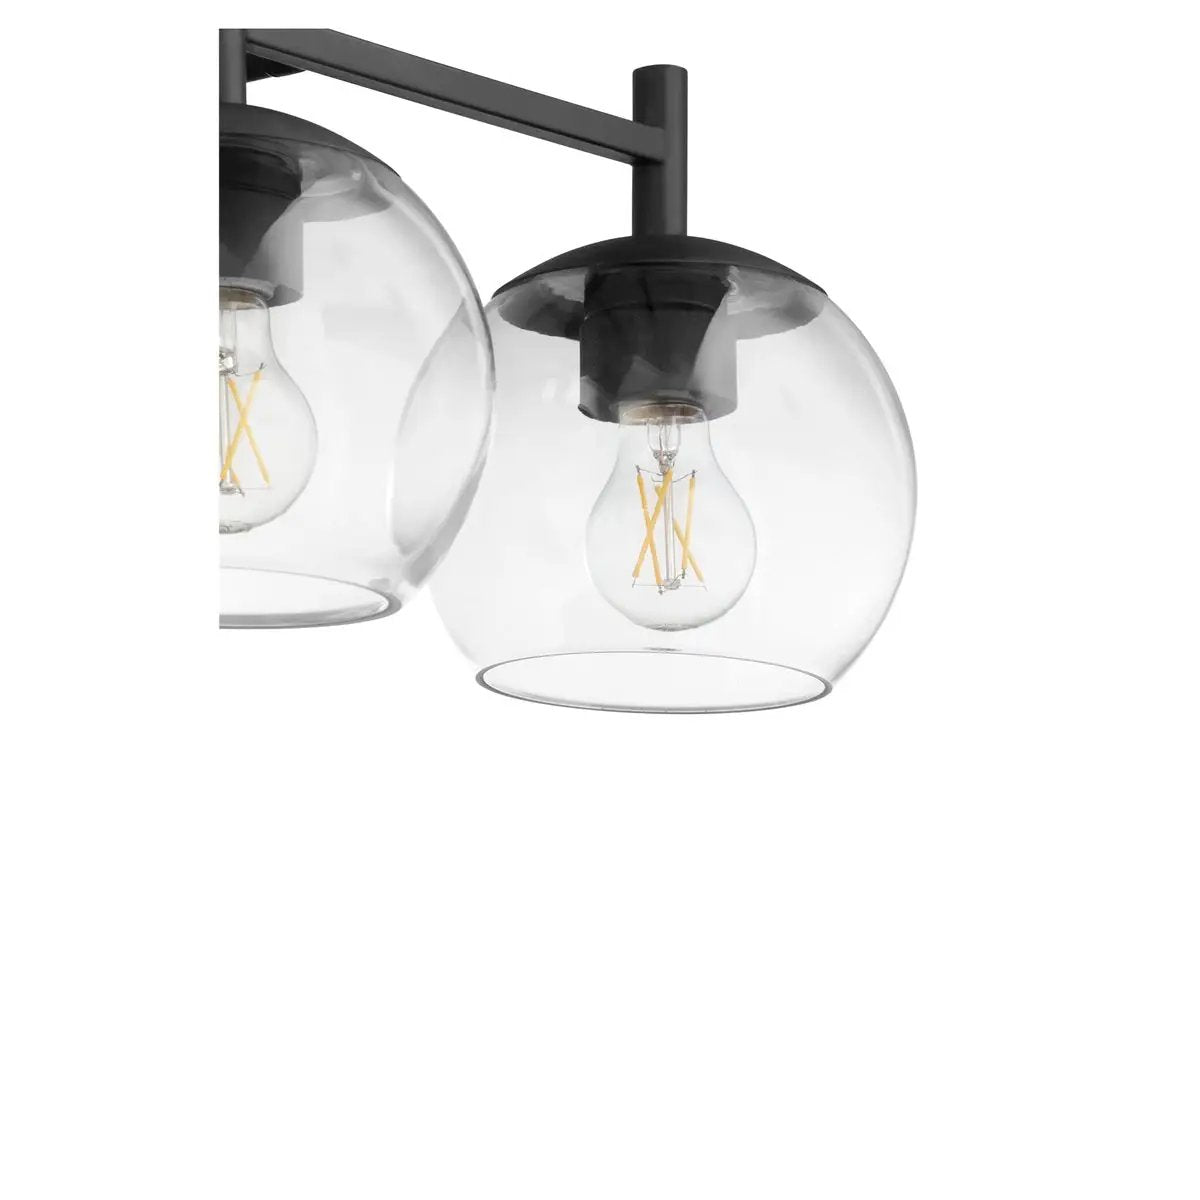 Mid Century Modern Vanity Light with clear glass globes and a light bulb inside, showcasing bold, clean lines and subtle sophistication. Perfect for residential and commercial spaces.